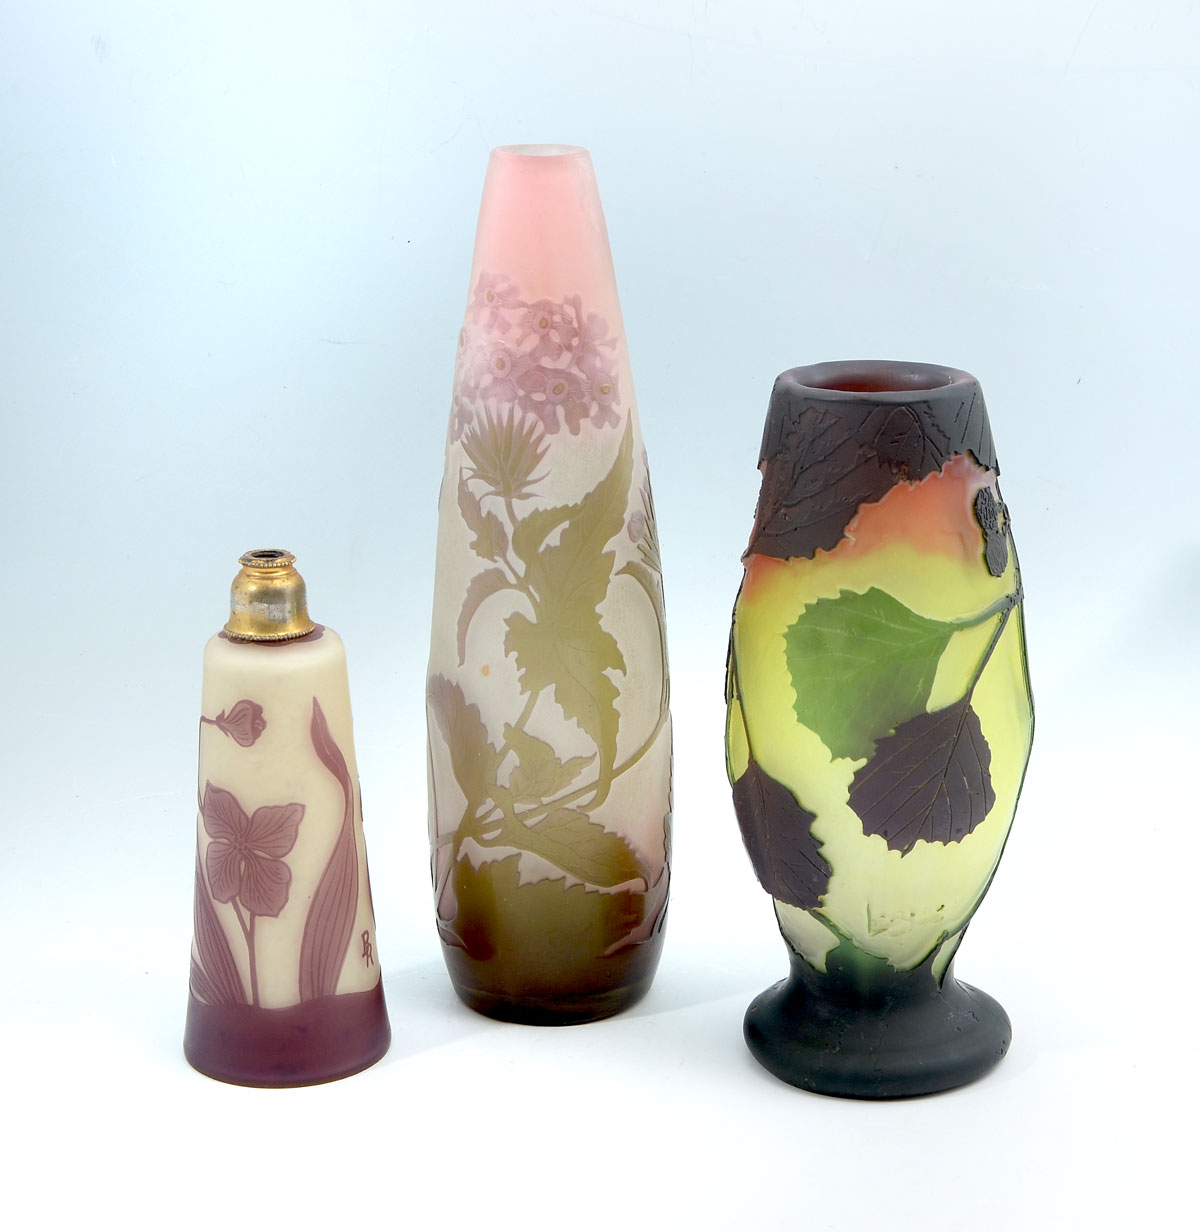 GALLE ART GLASS VASE & 2 OTHERS: